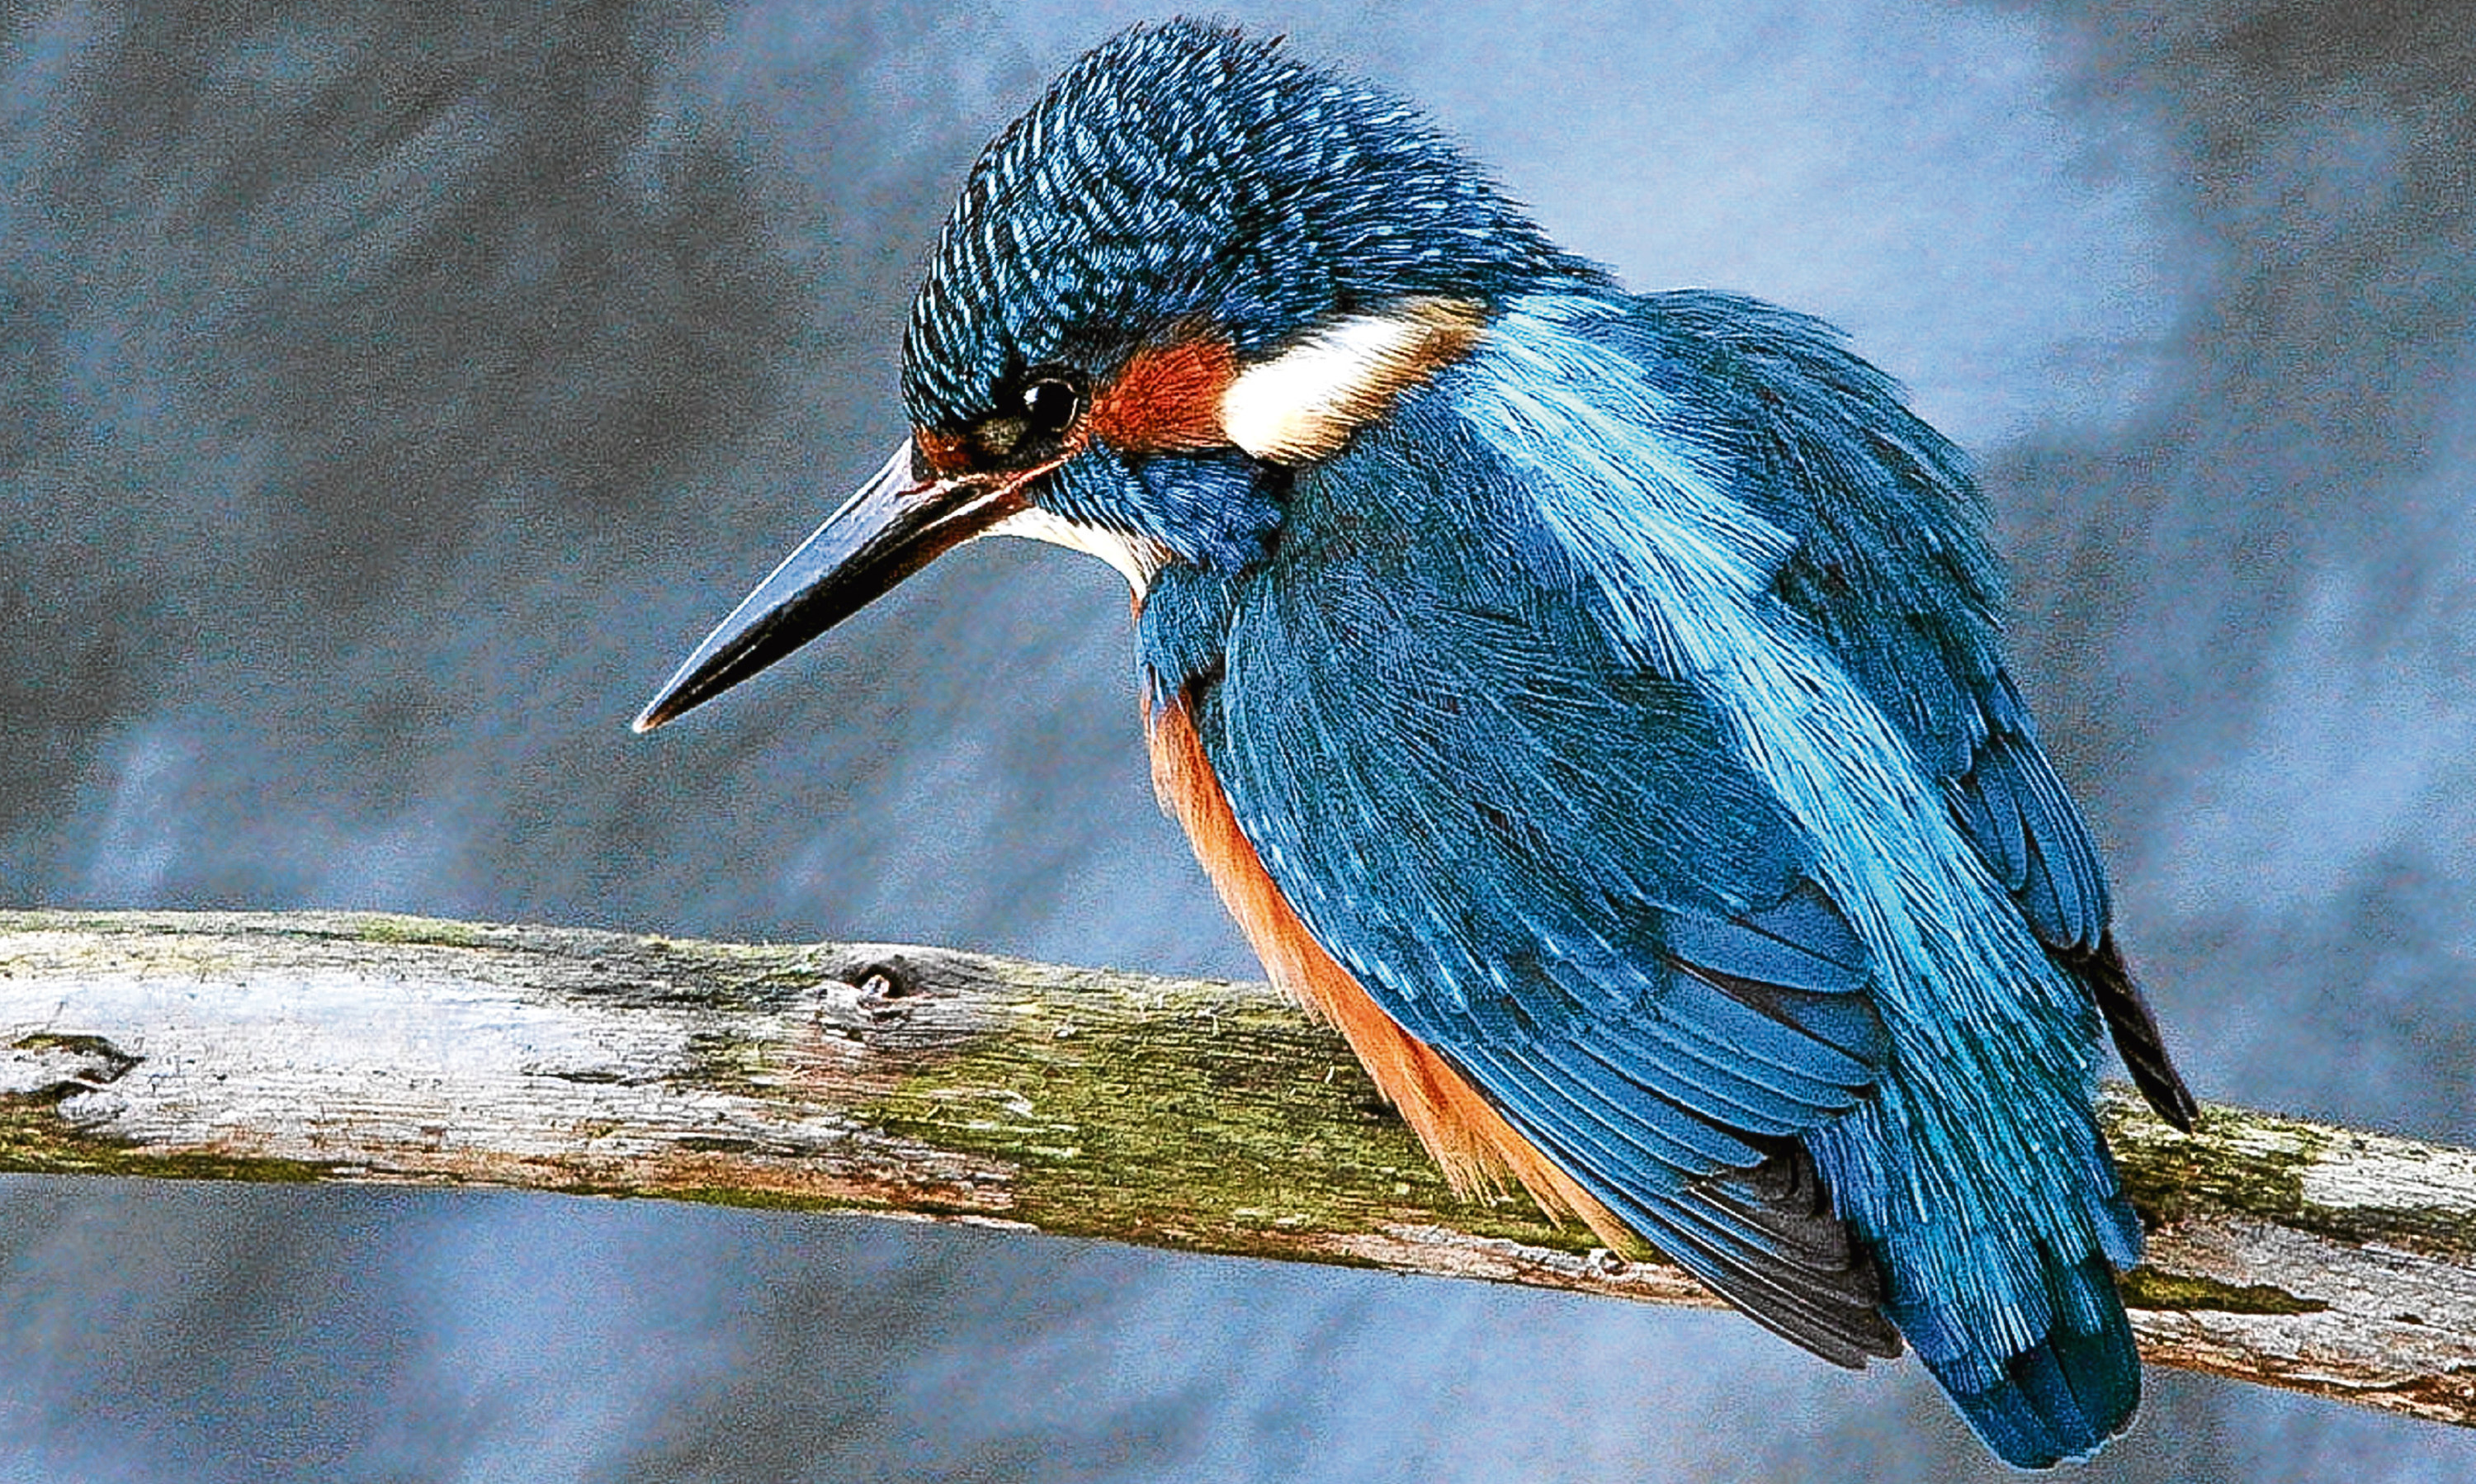 Jim caught a fleeting glimpse of a kingfisher by a rain-drenched riverbank but it never returned so he could draw it.